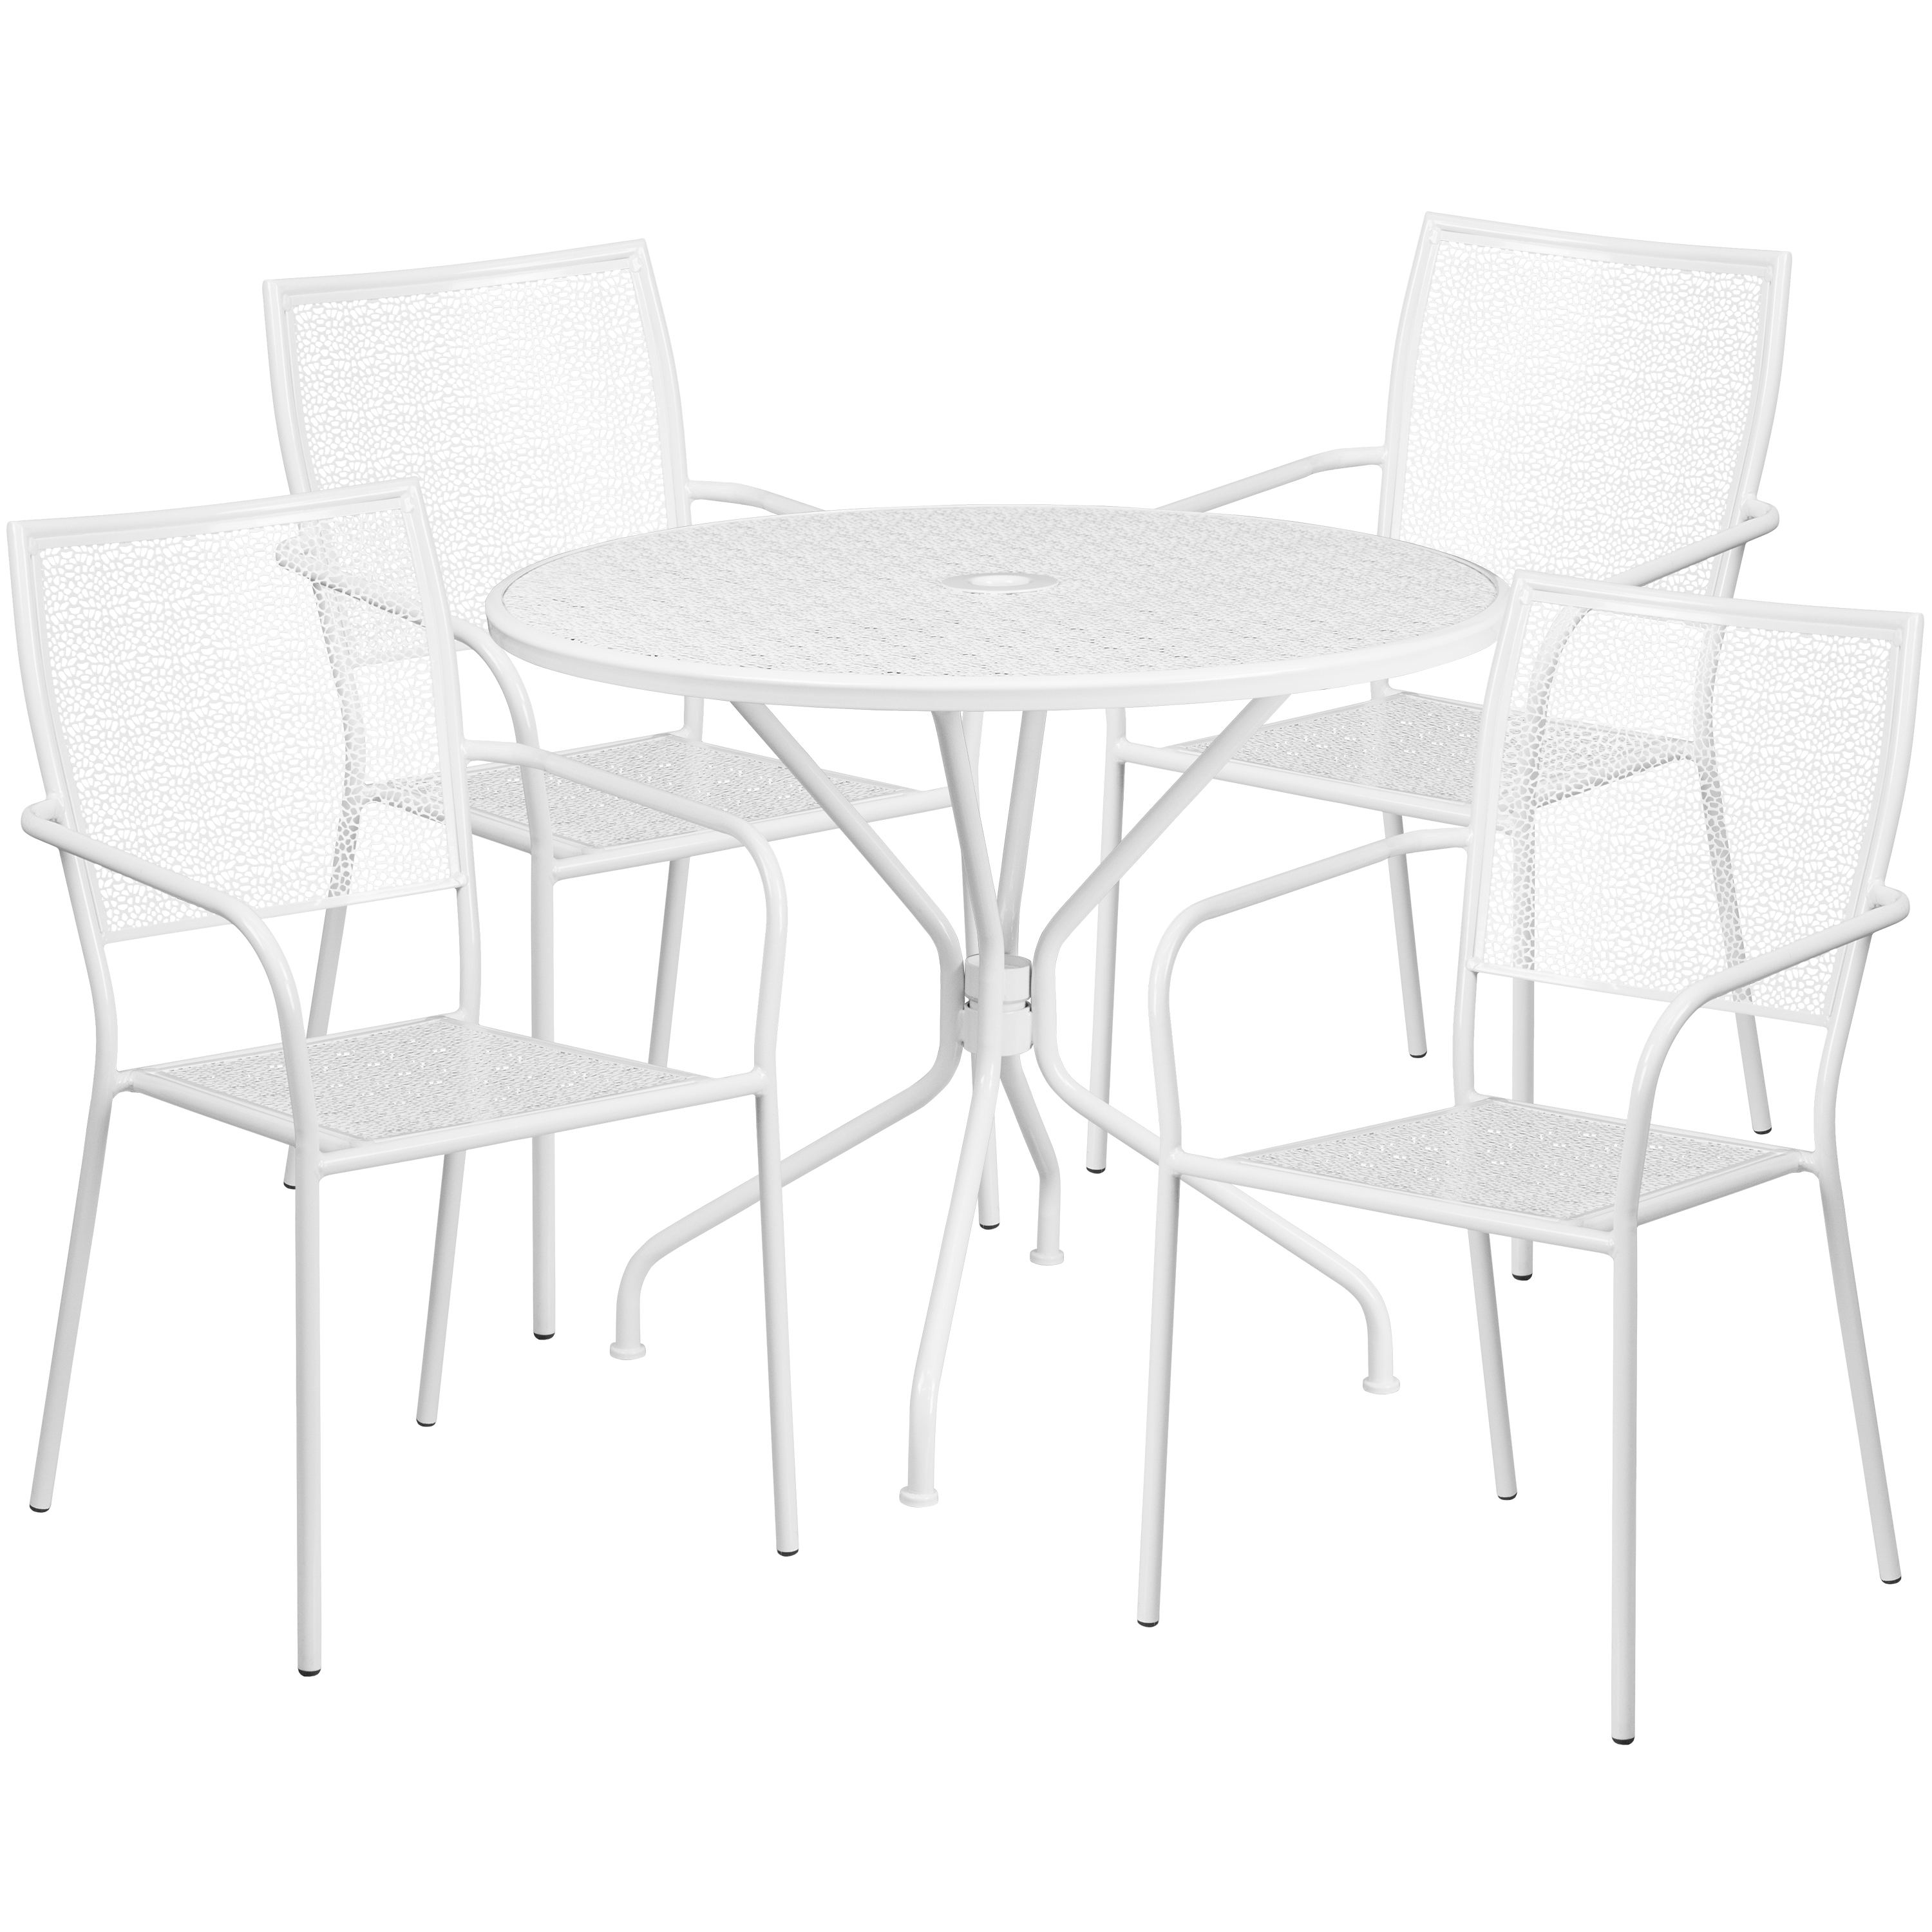 Flash Furniture Oia Commercial Grade 35.25" Round White Indoor-Outdoor Steel Patio Table Set with 4 Square Back Chairs - image 1 of 5